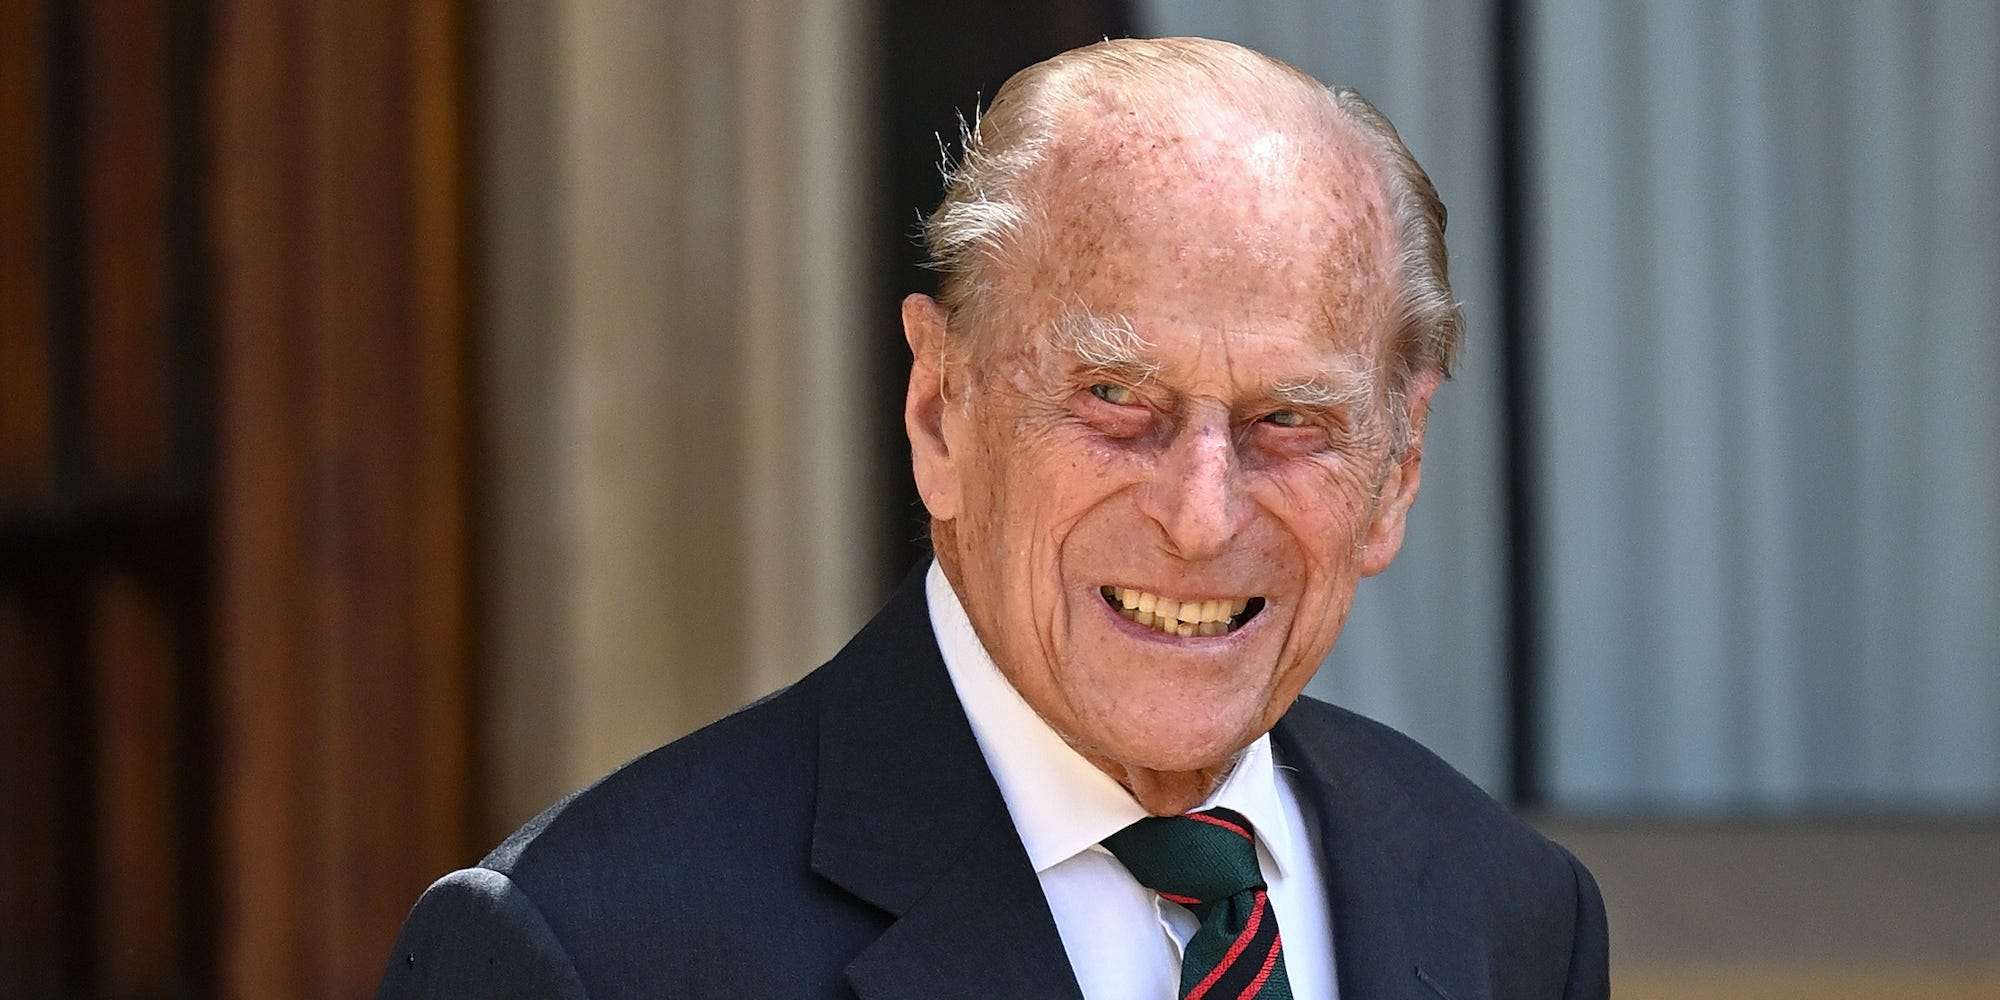 Prince Philip spent a month in hospital with an infection and heart trouble, and was discharged ...